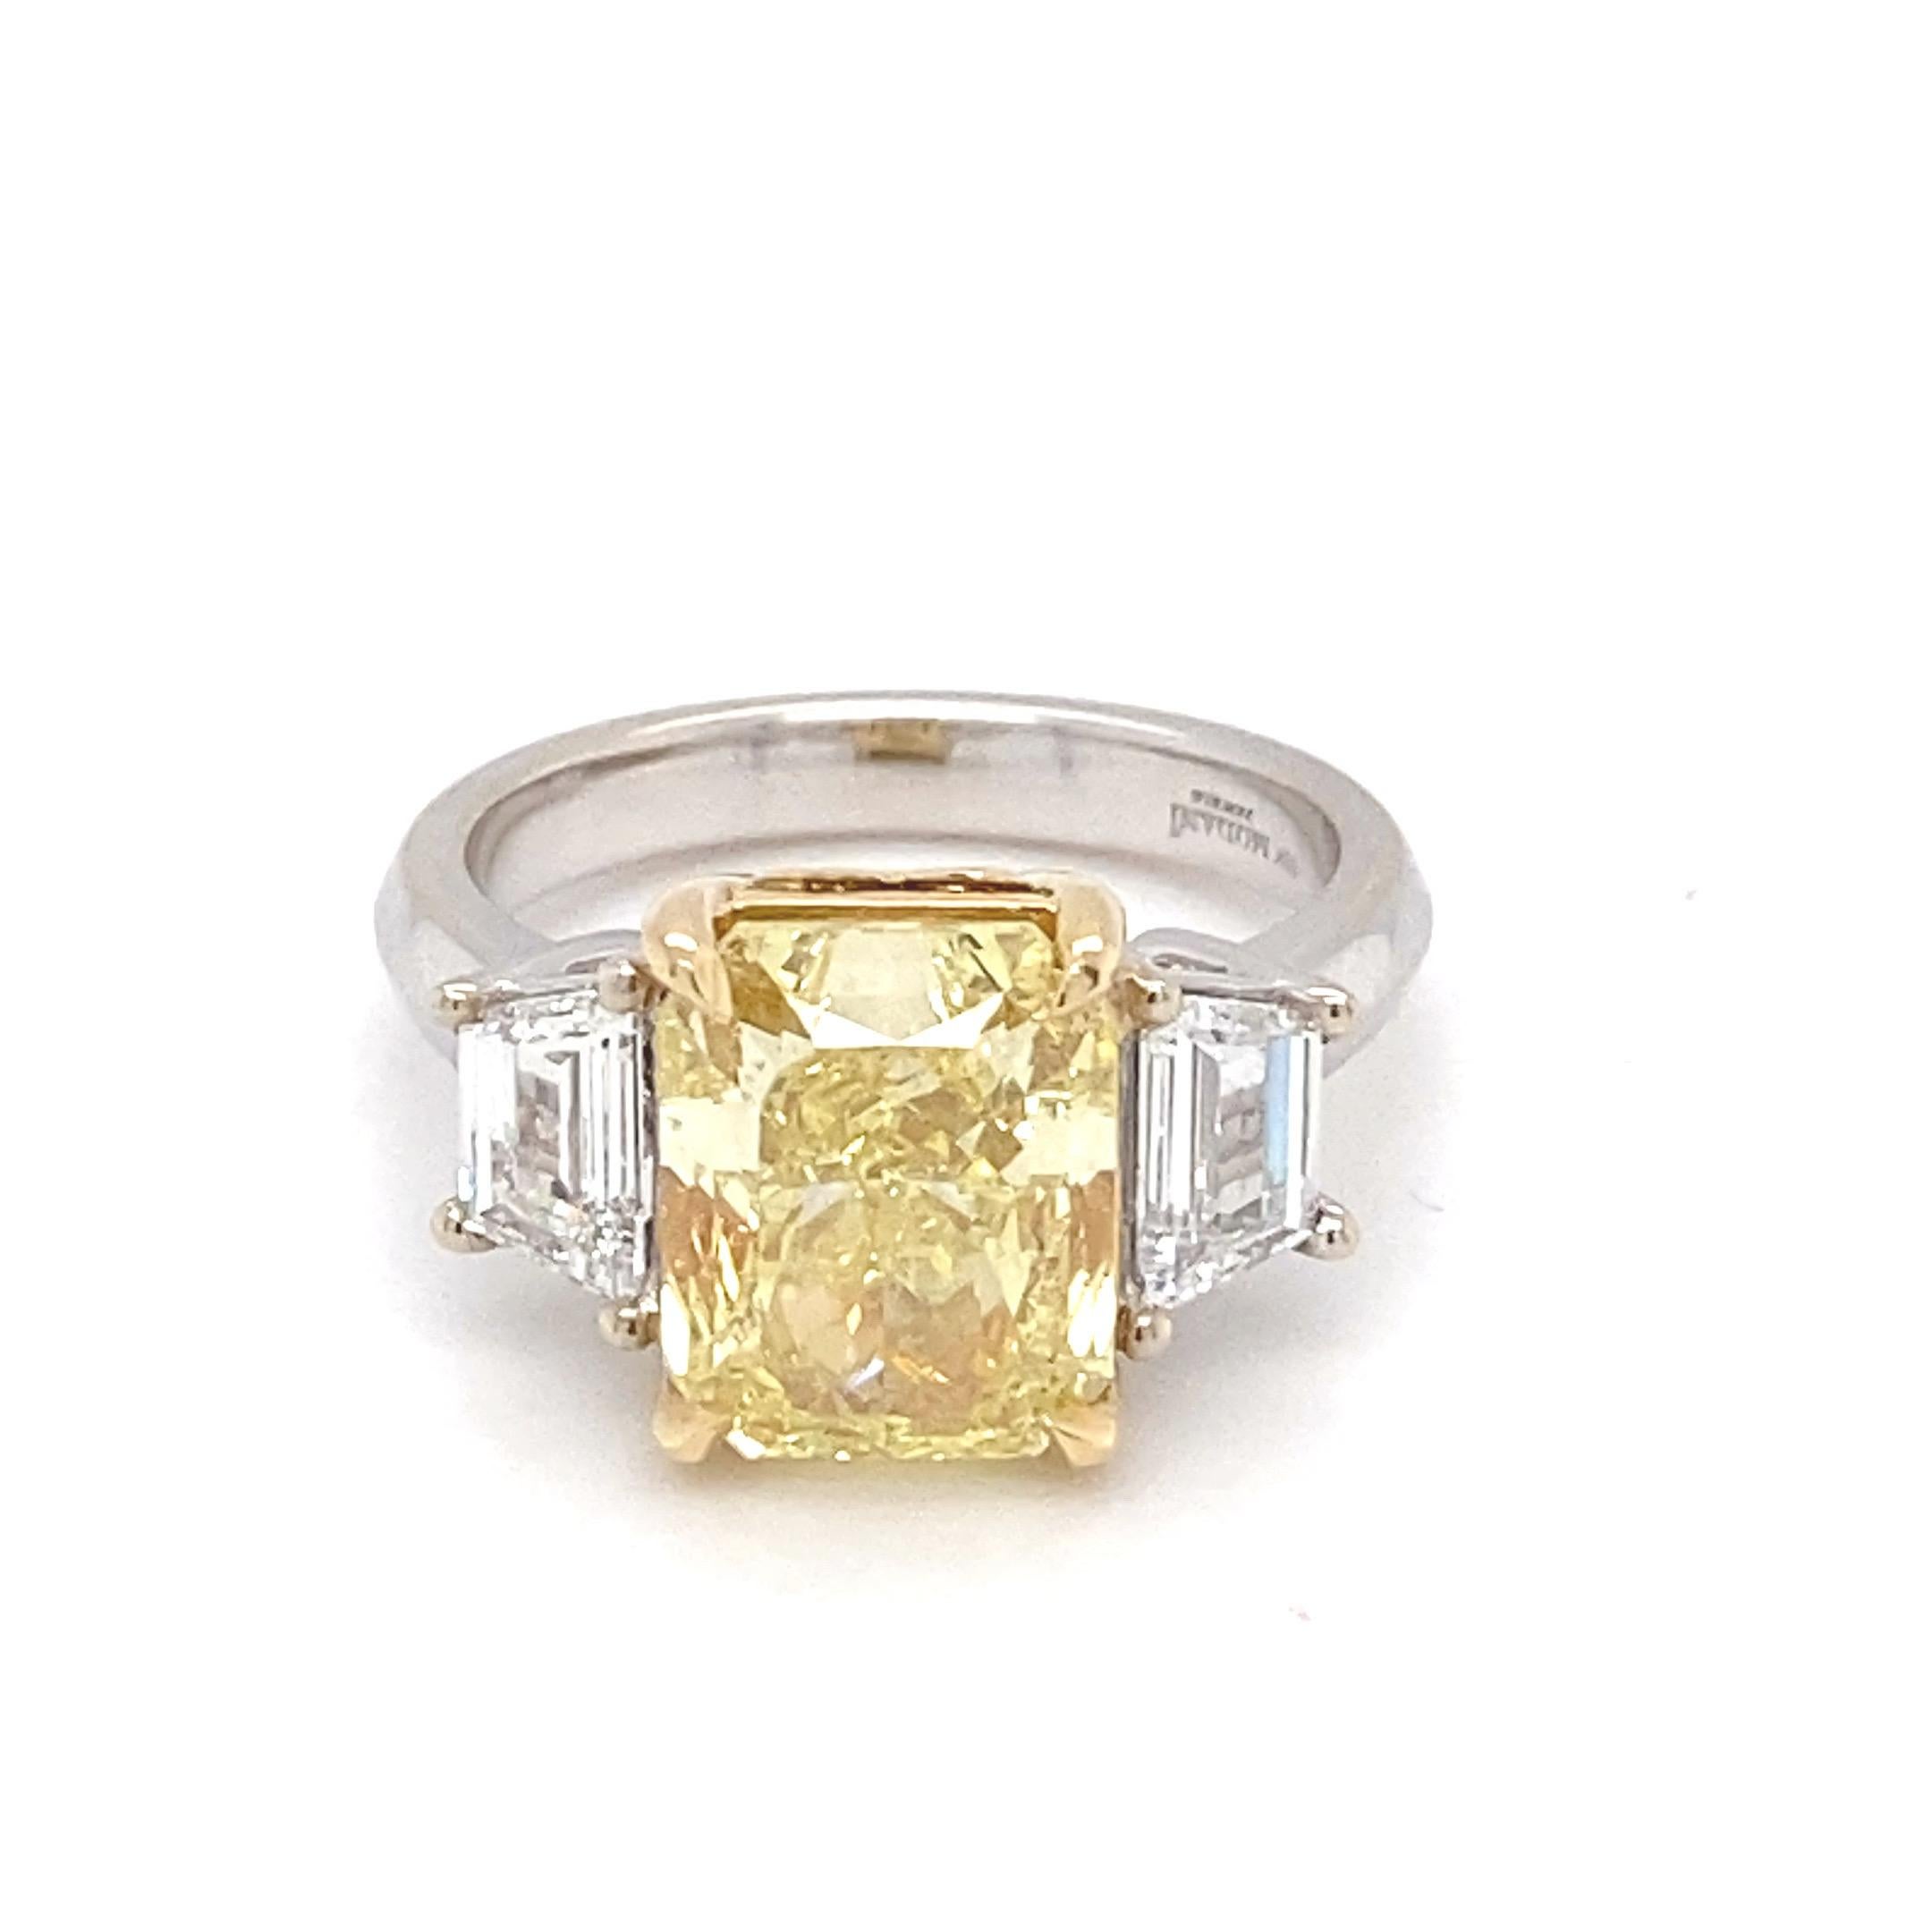 This magnificent ring boasts a Gia Certified 5.01 Carat Intense Fancy Yellow cushion diamond as the center stone with two trapezoid white diamond as side stone. The center stone is mounted in yellow gold whereas the side stone and the shank is in